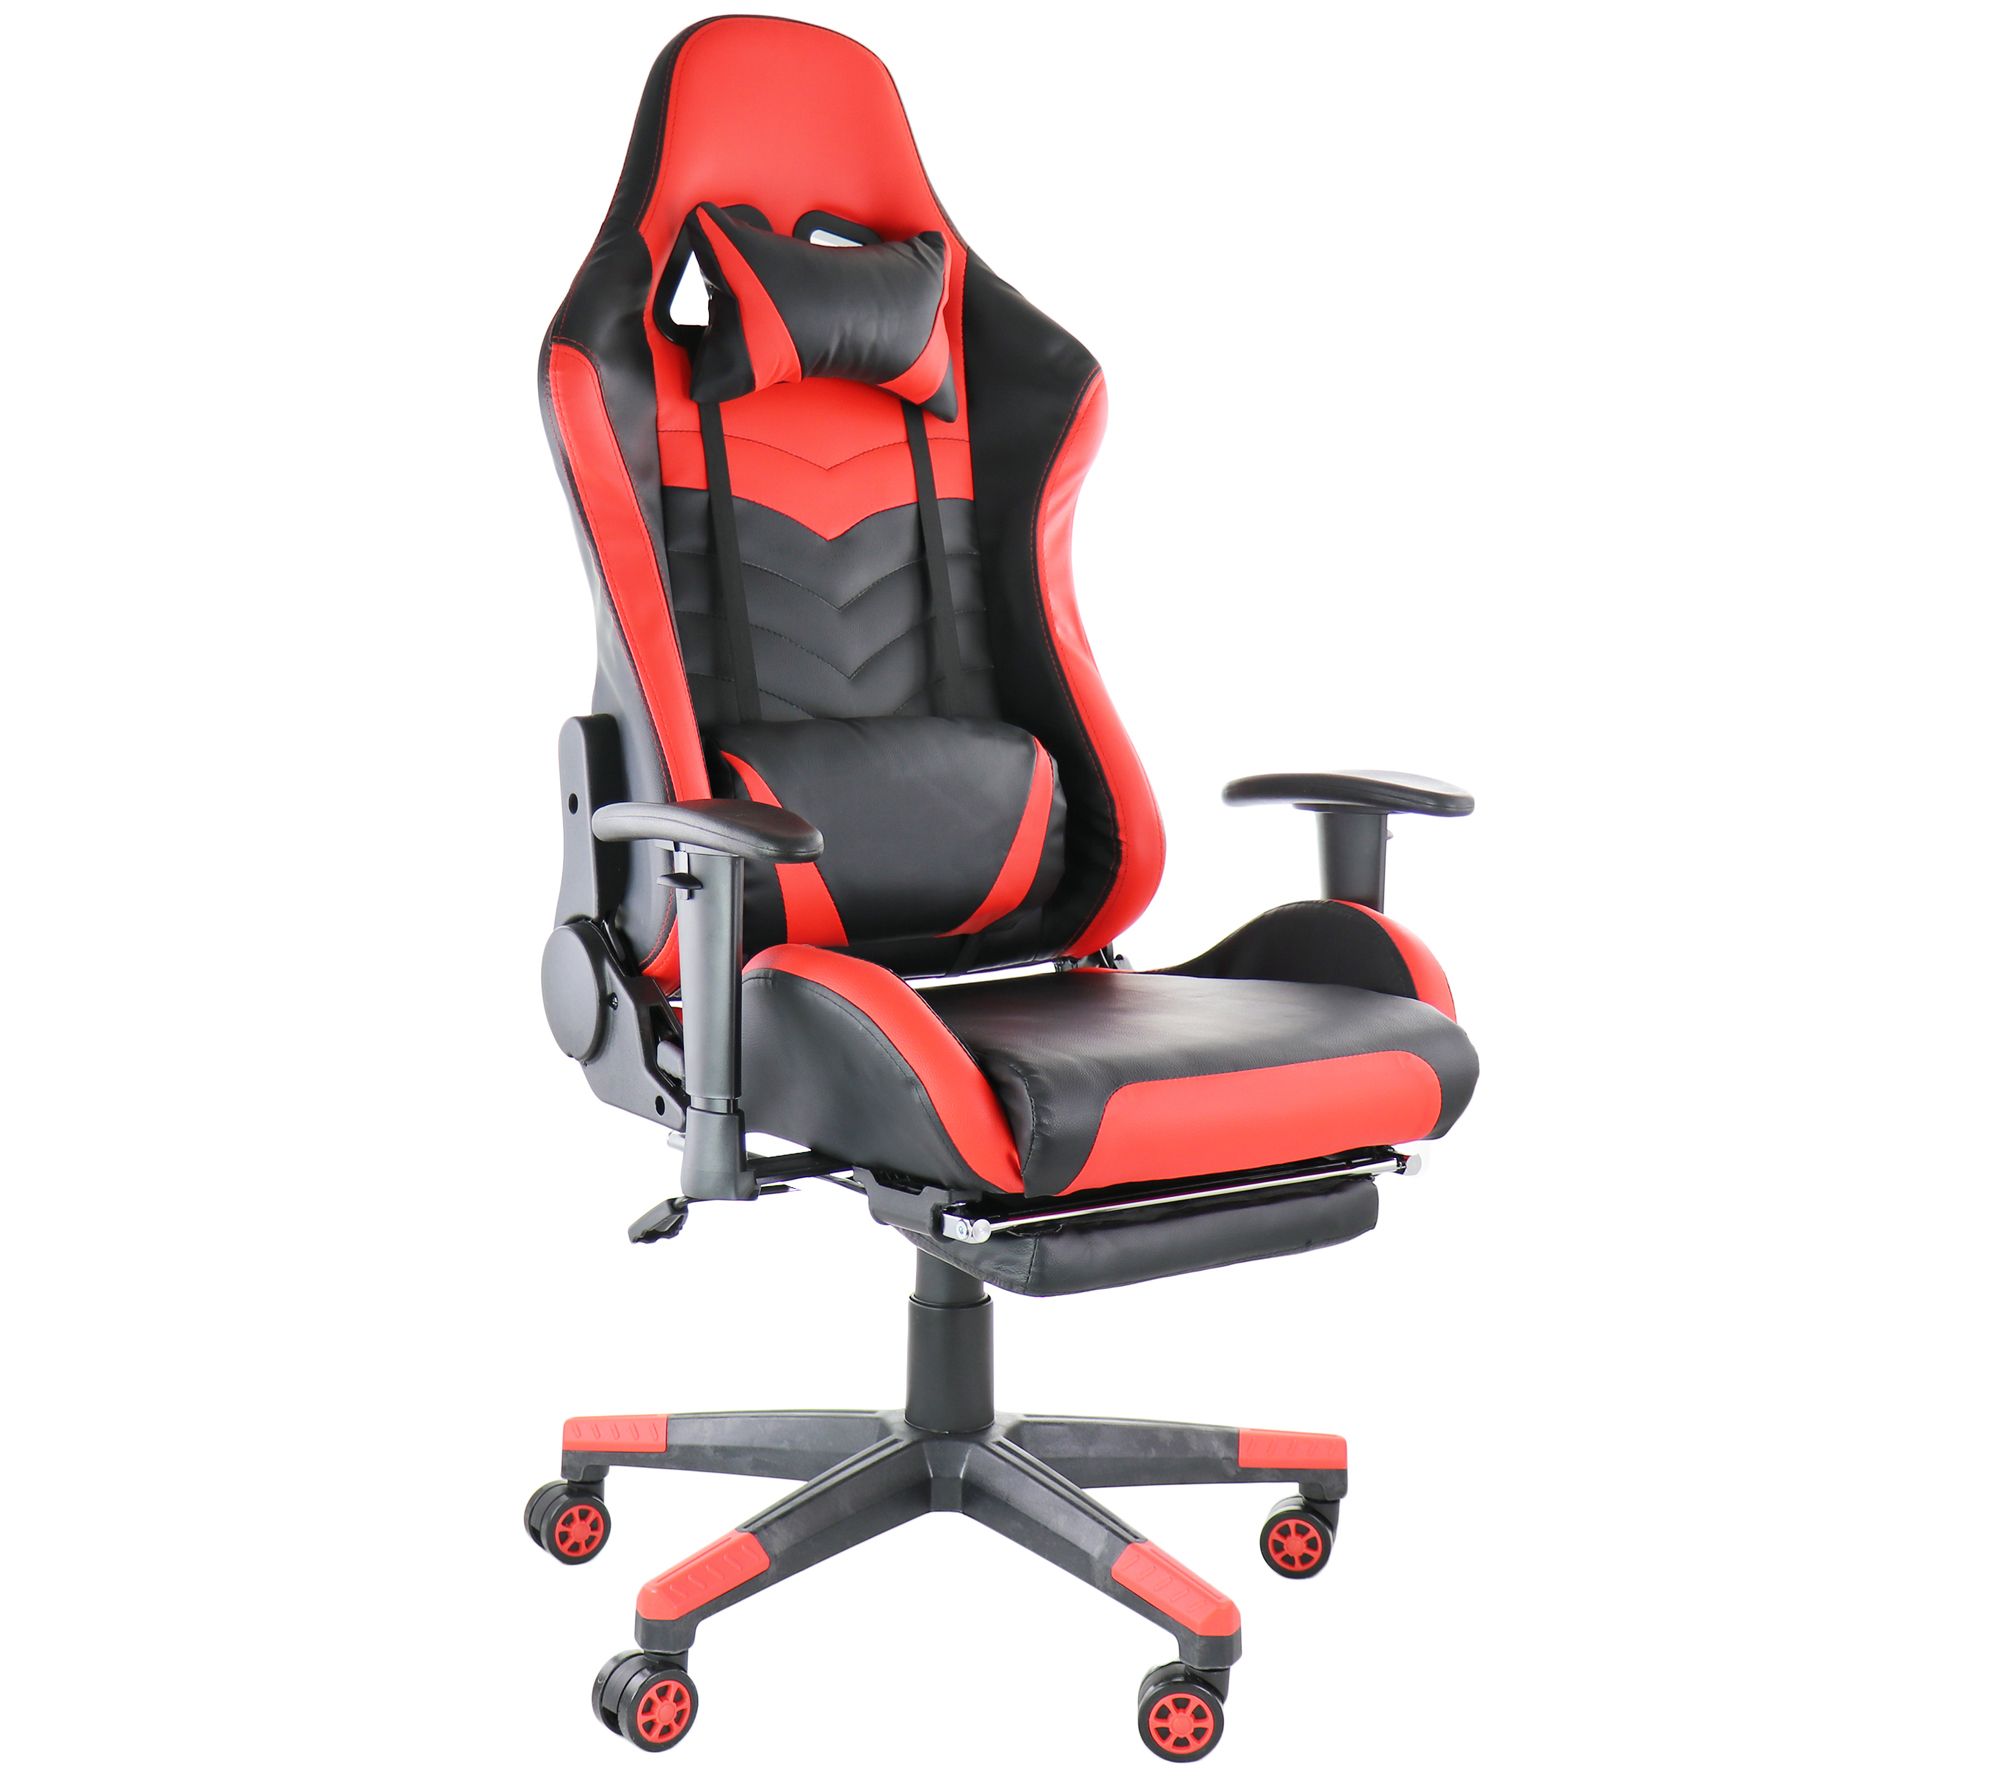 Gaming Chair with Footrest Fabric Inbox Zero Color: Black/Light Green